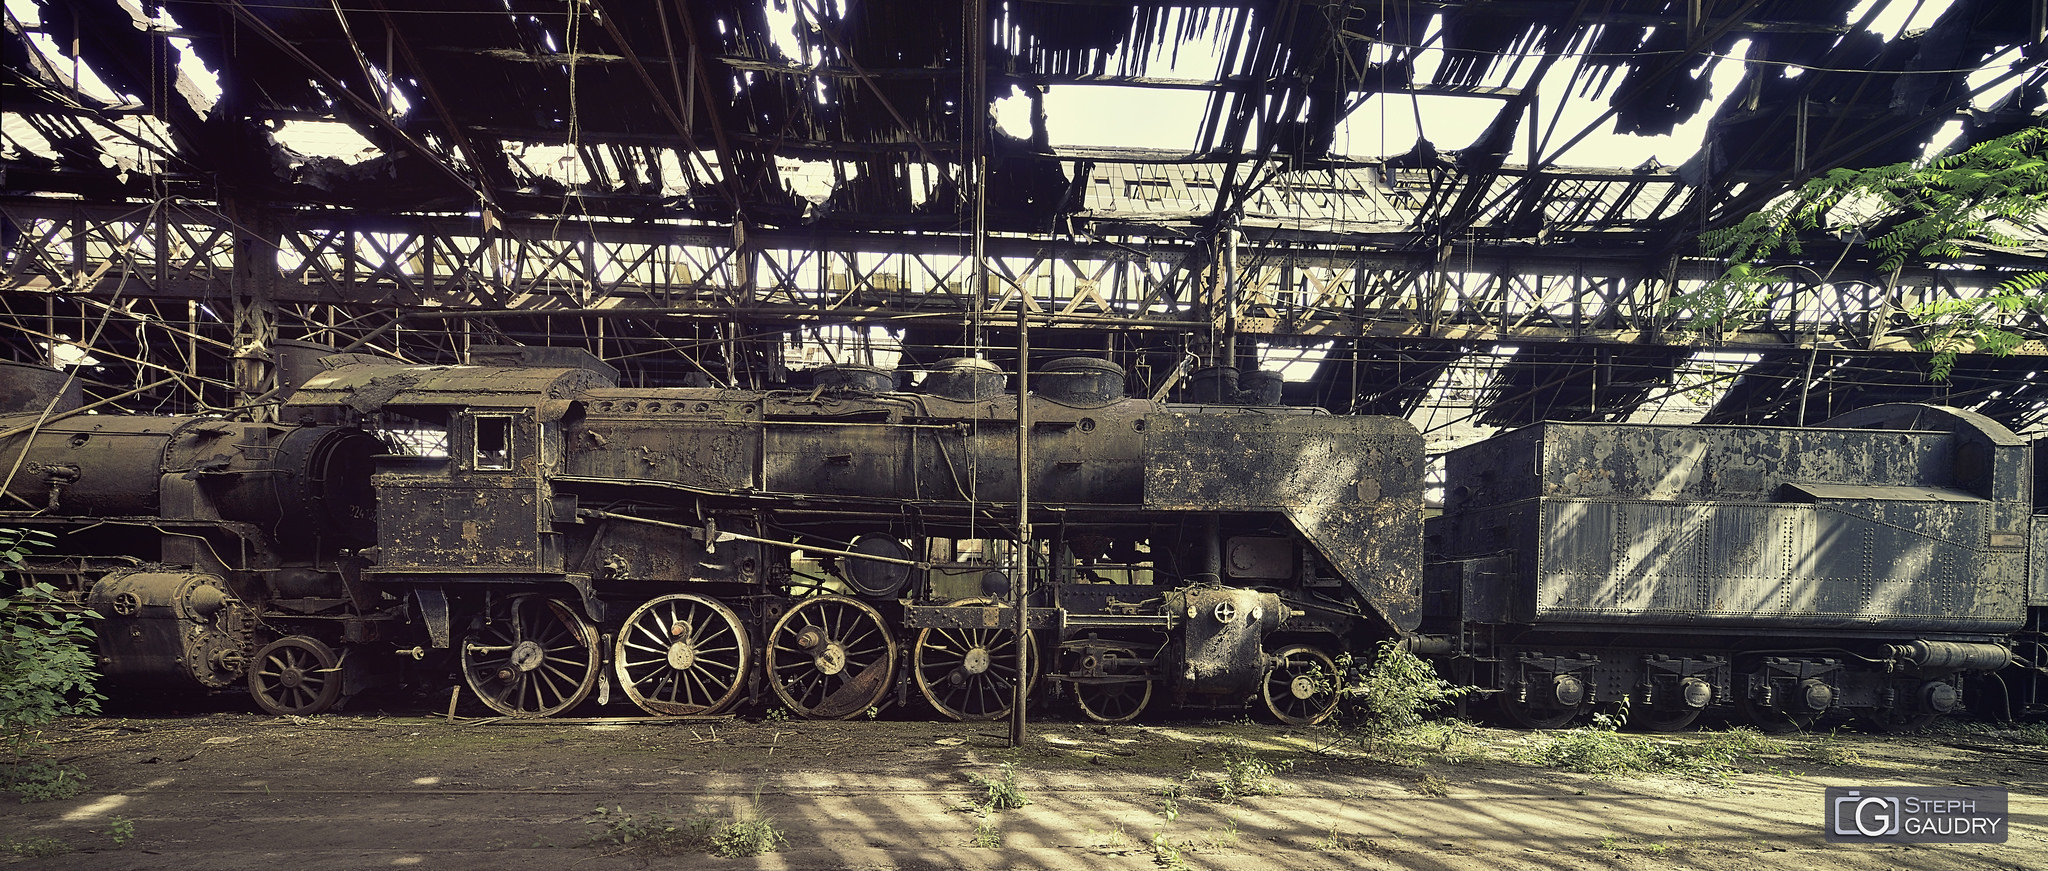 Lost city / Abandoned steam train